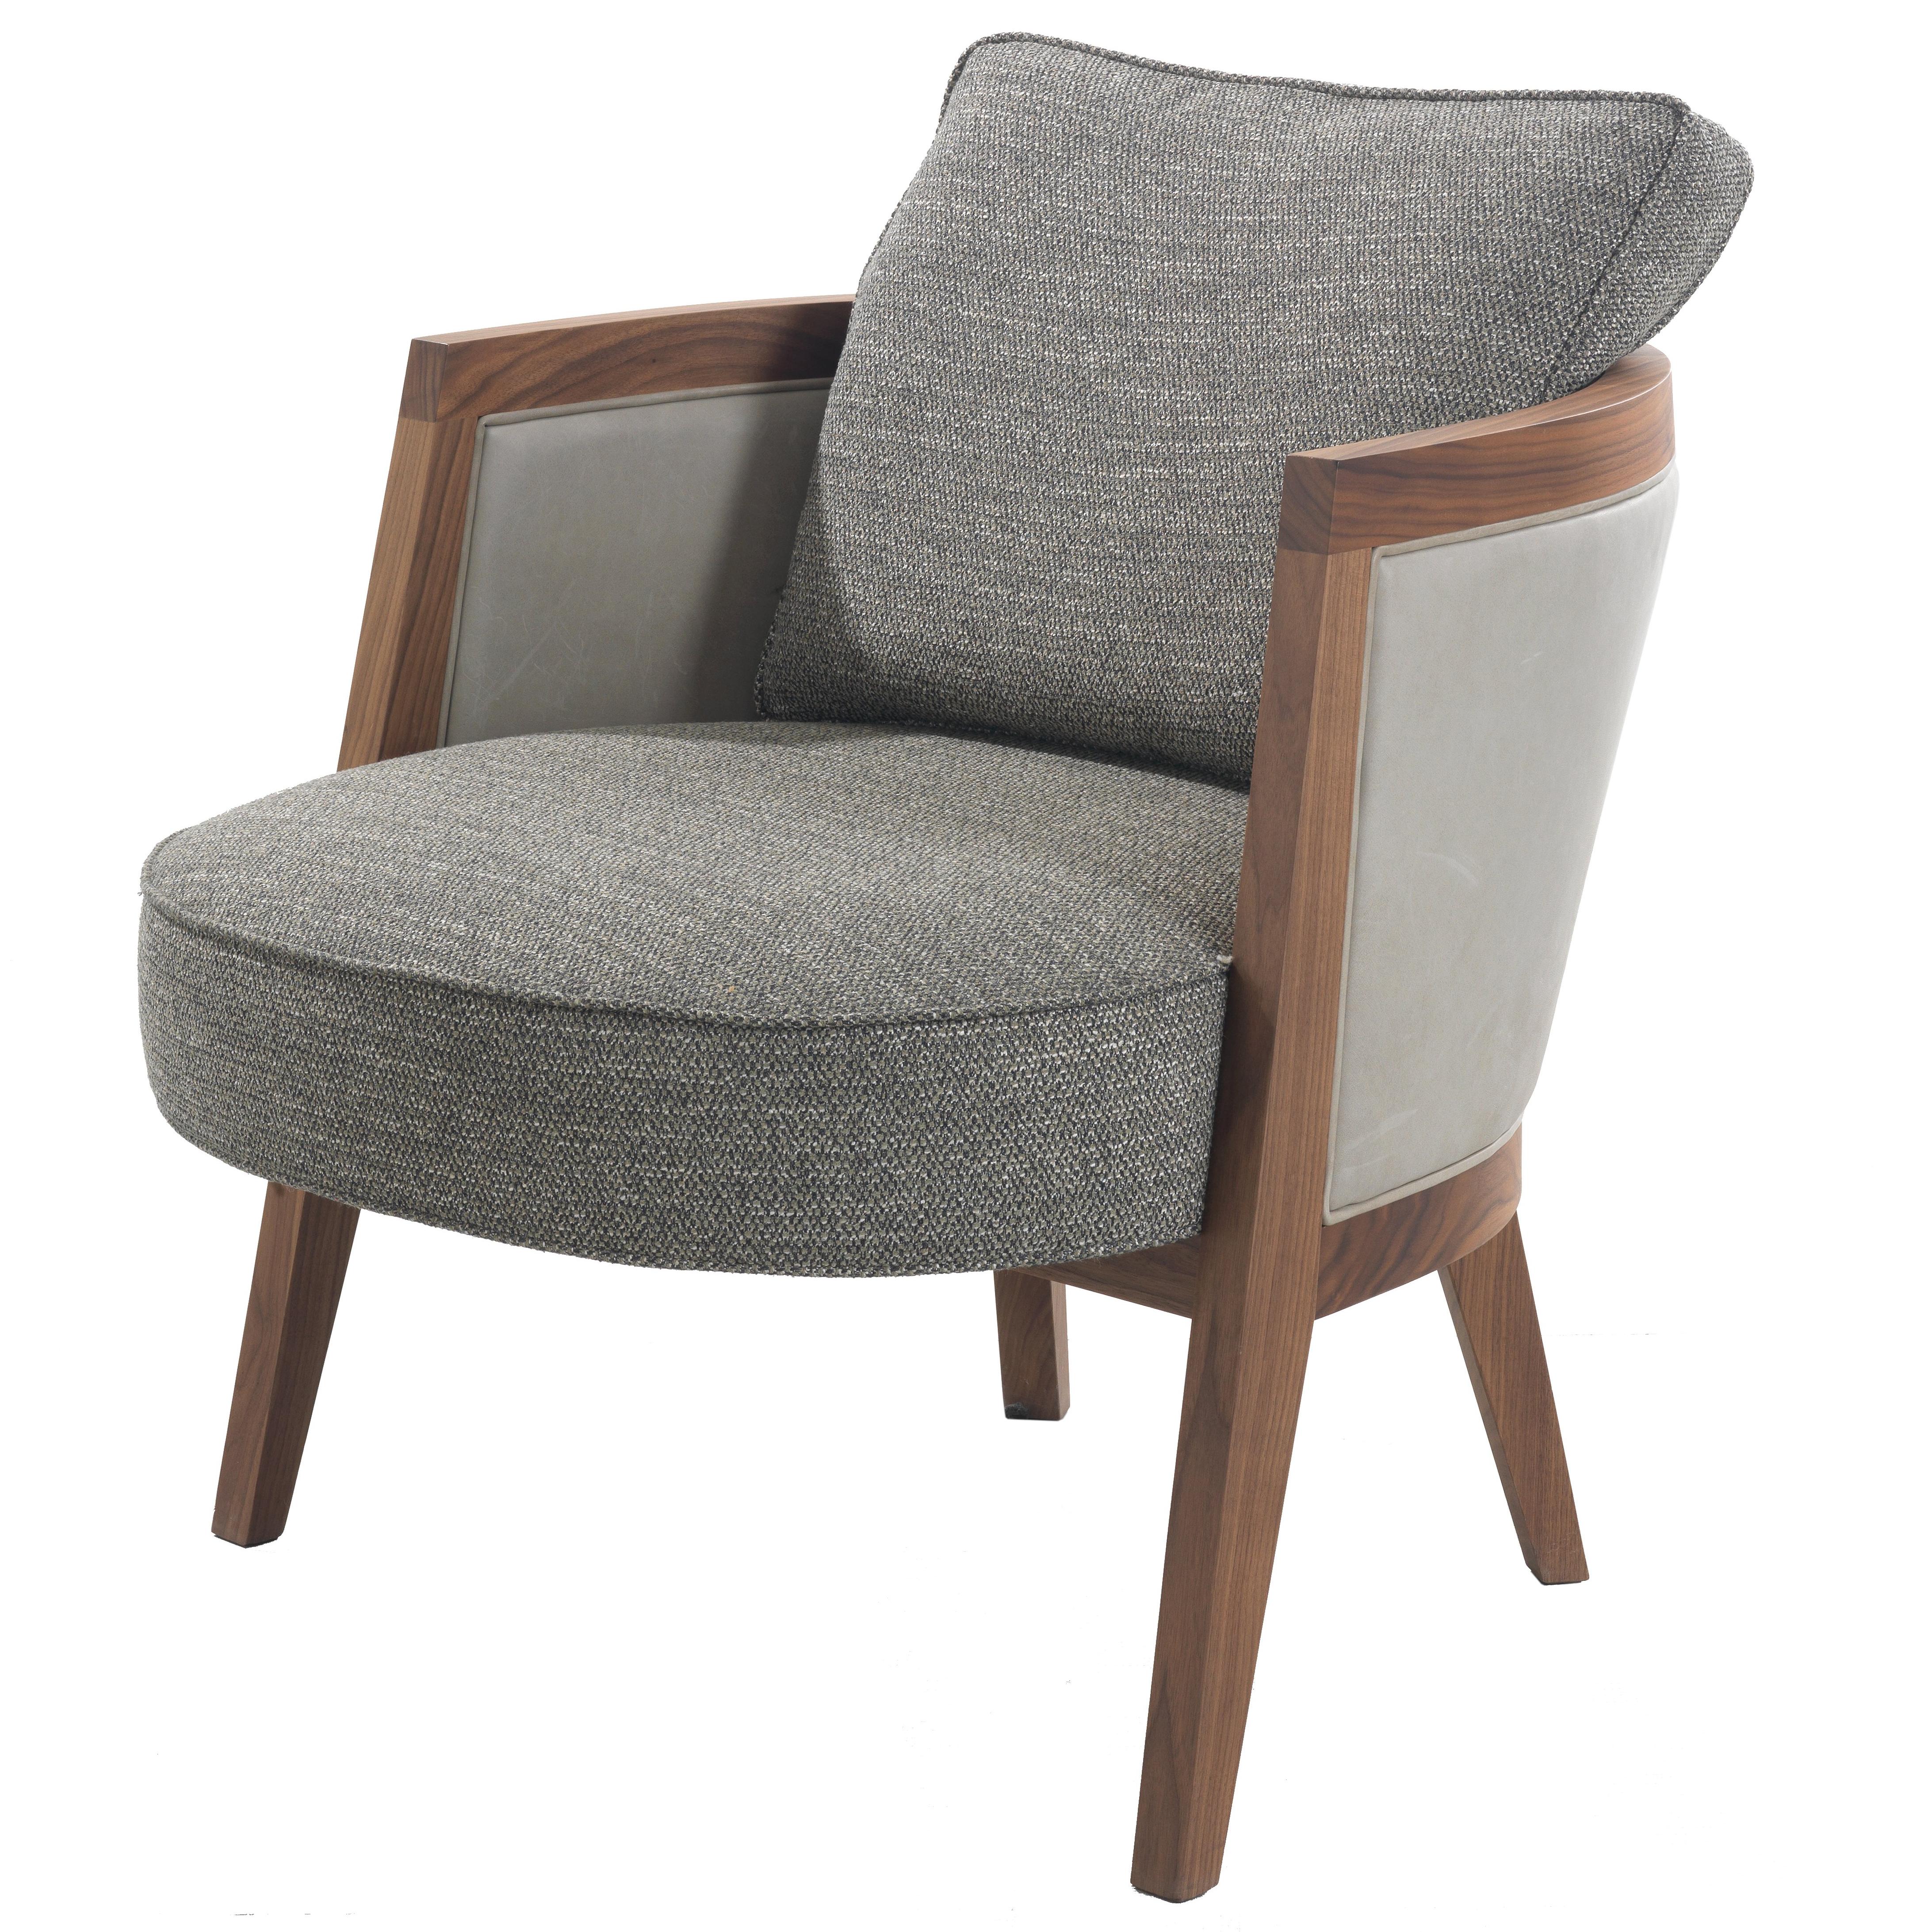 Pacini & Cappellini Cocoon Armchair in Grey by Giuliano & Gabriele Cappellettii For Sale